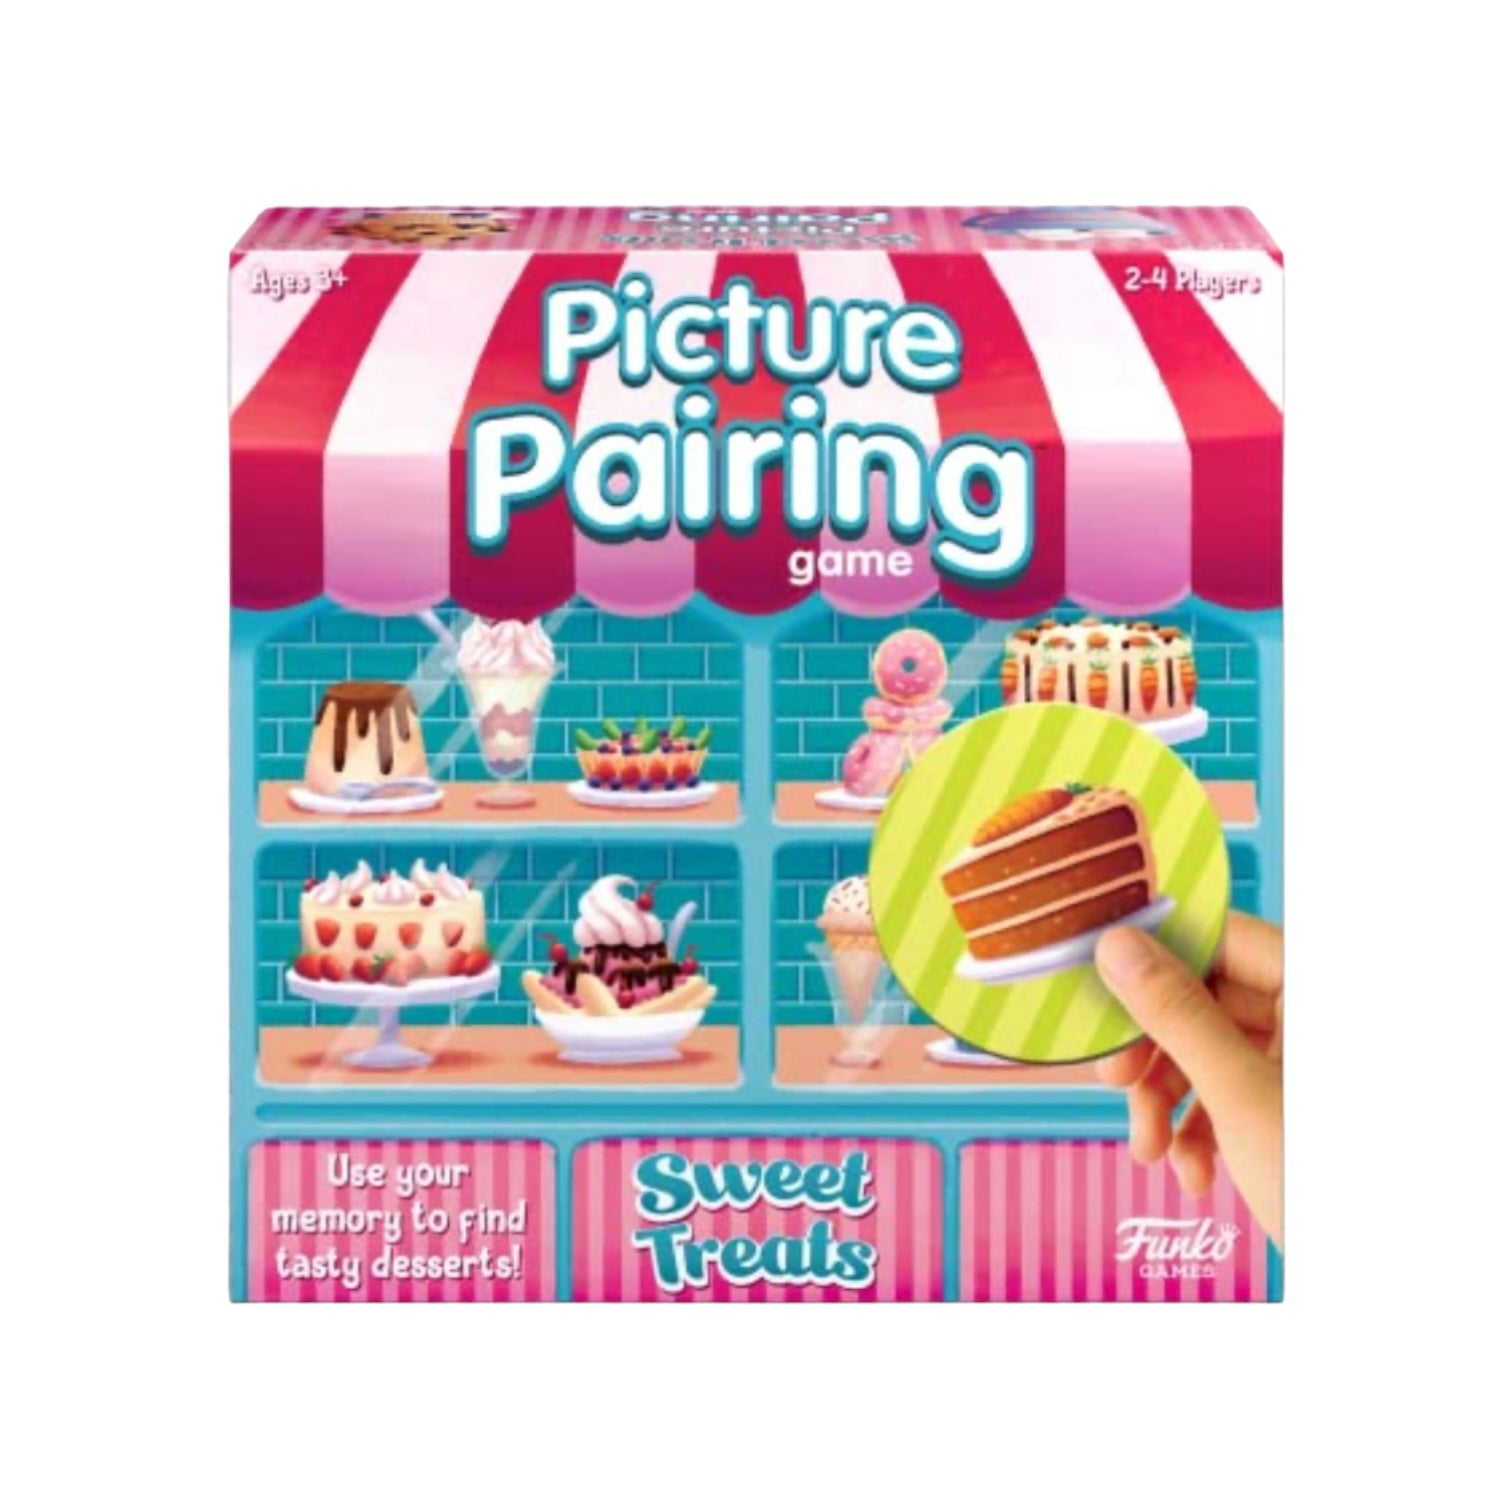 Sweet Treats - Picture Pairing Funko Game